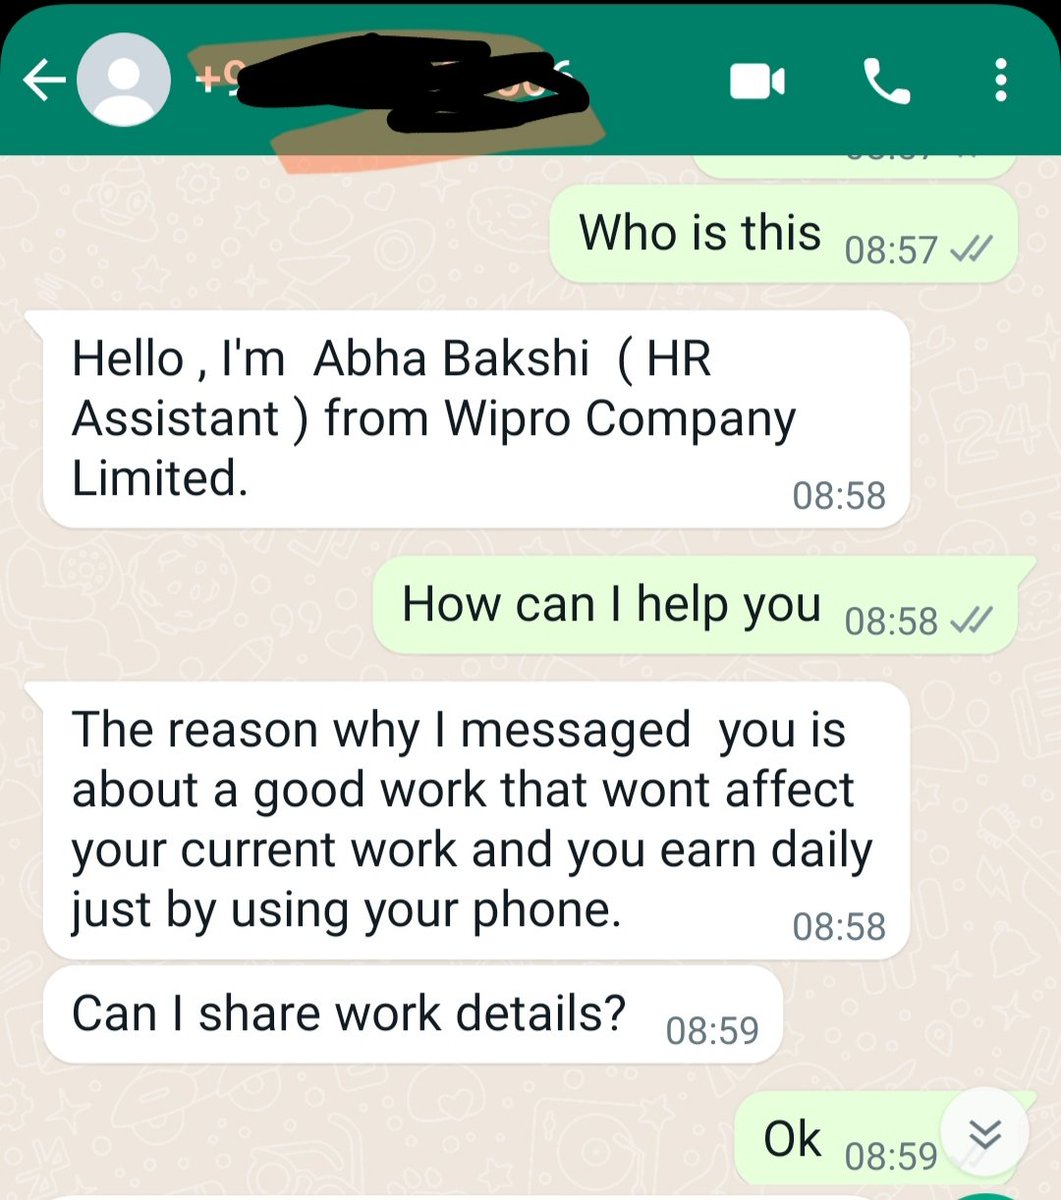 Does Wipro promotes this kind of jobs?